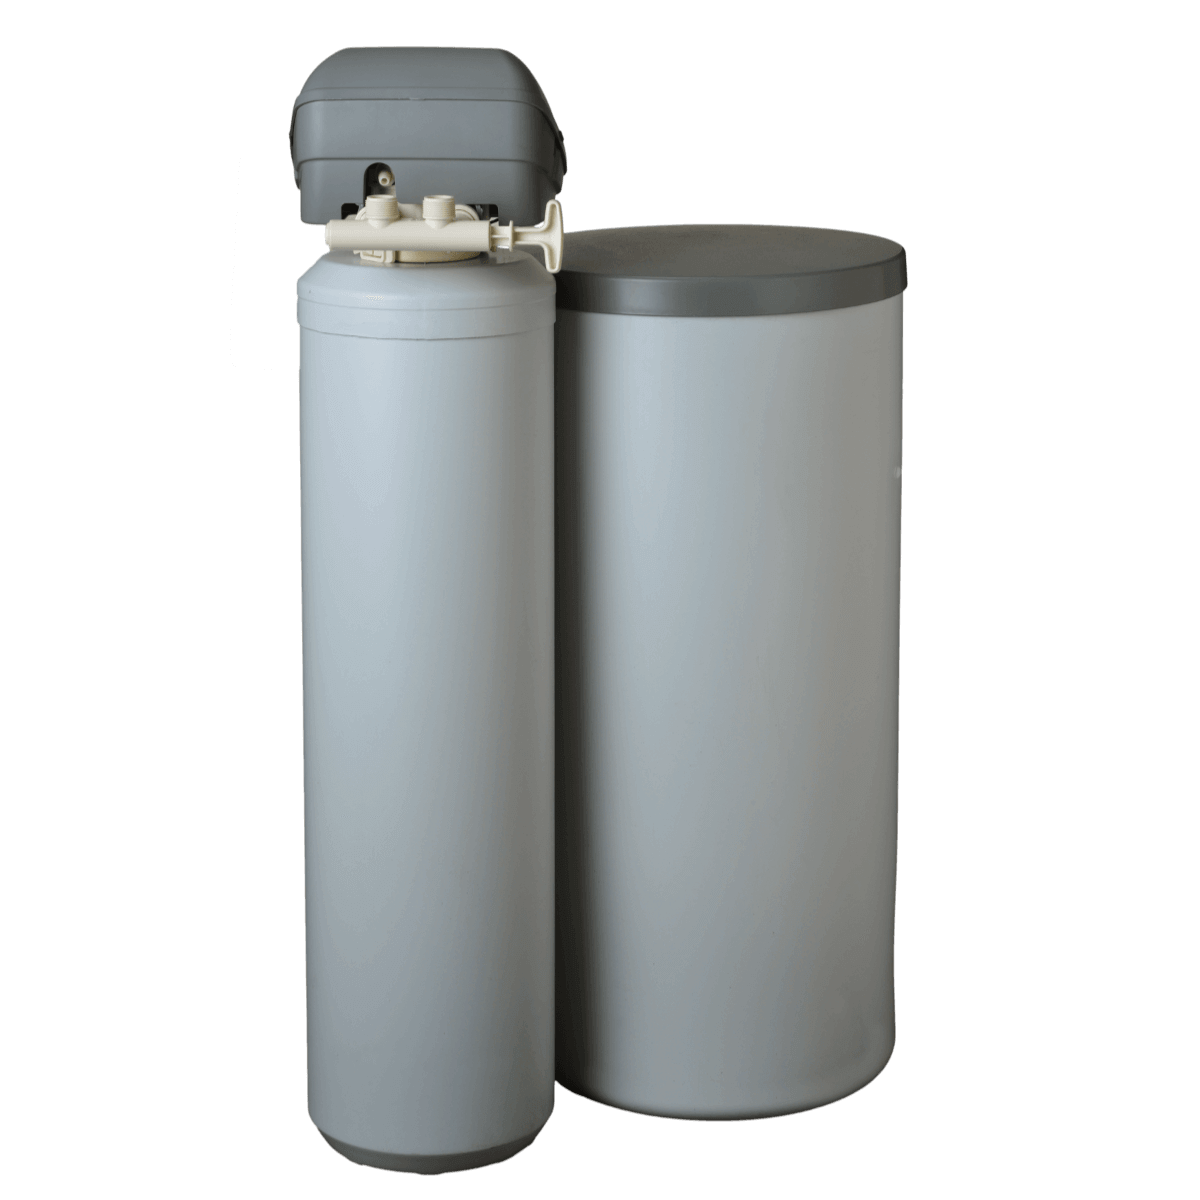 Whirlpool Demand Initiated Two Tank Water Softener Whes3t